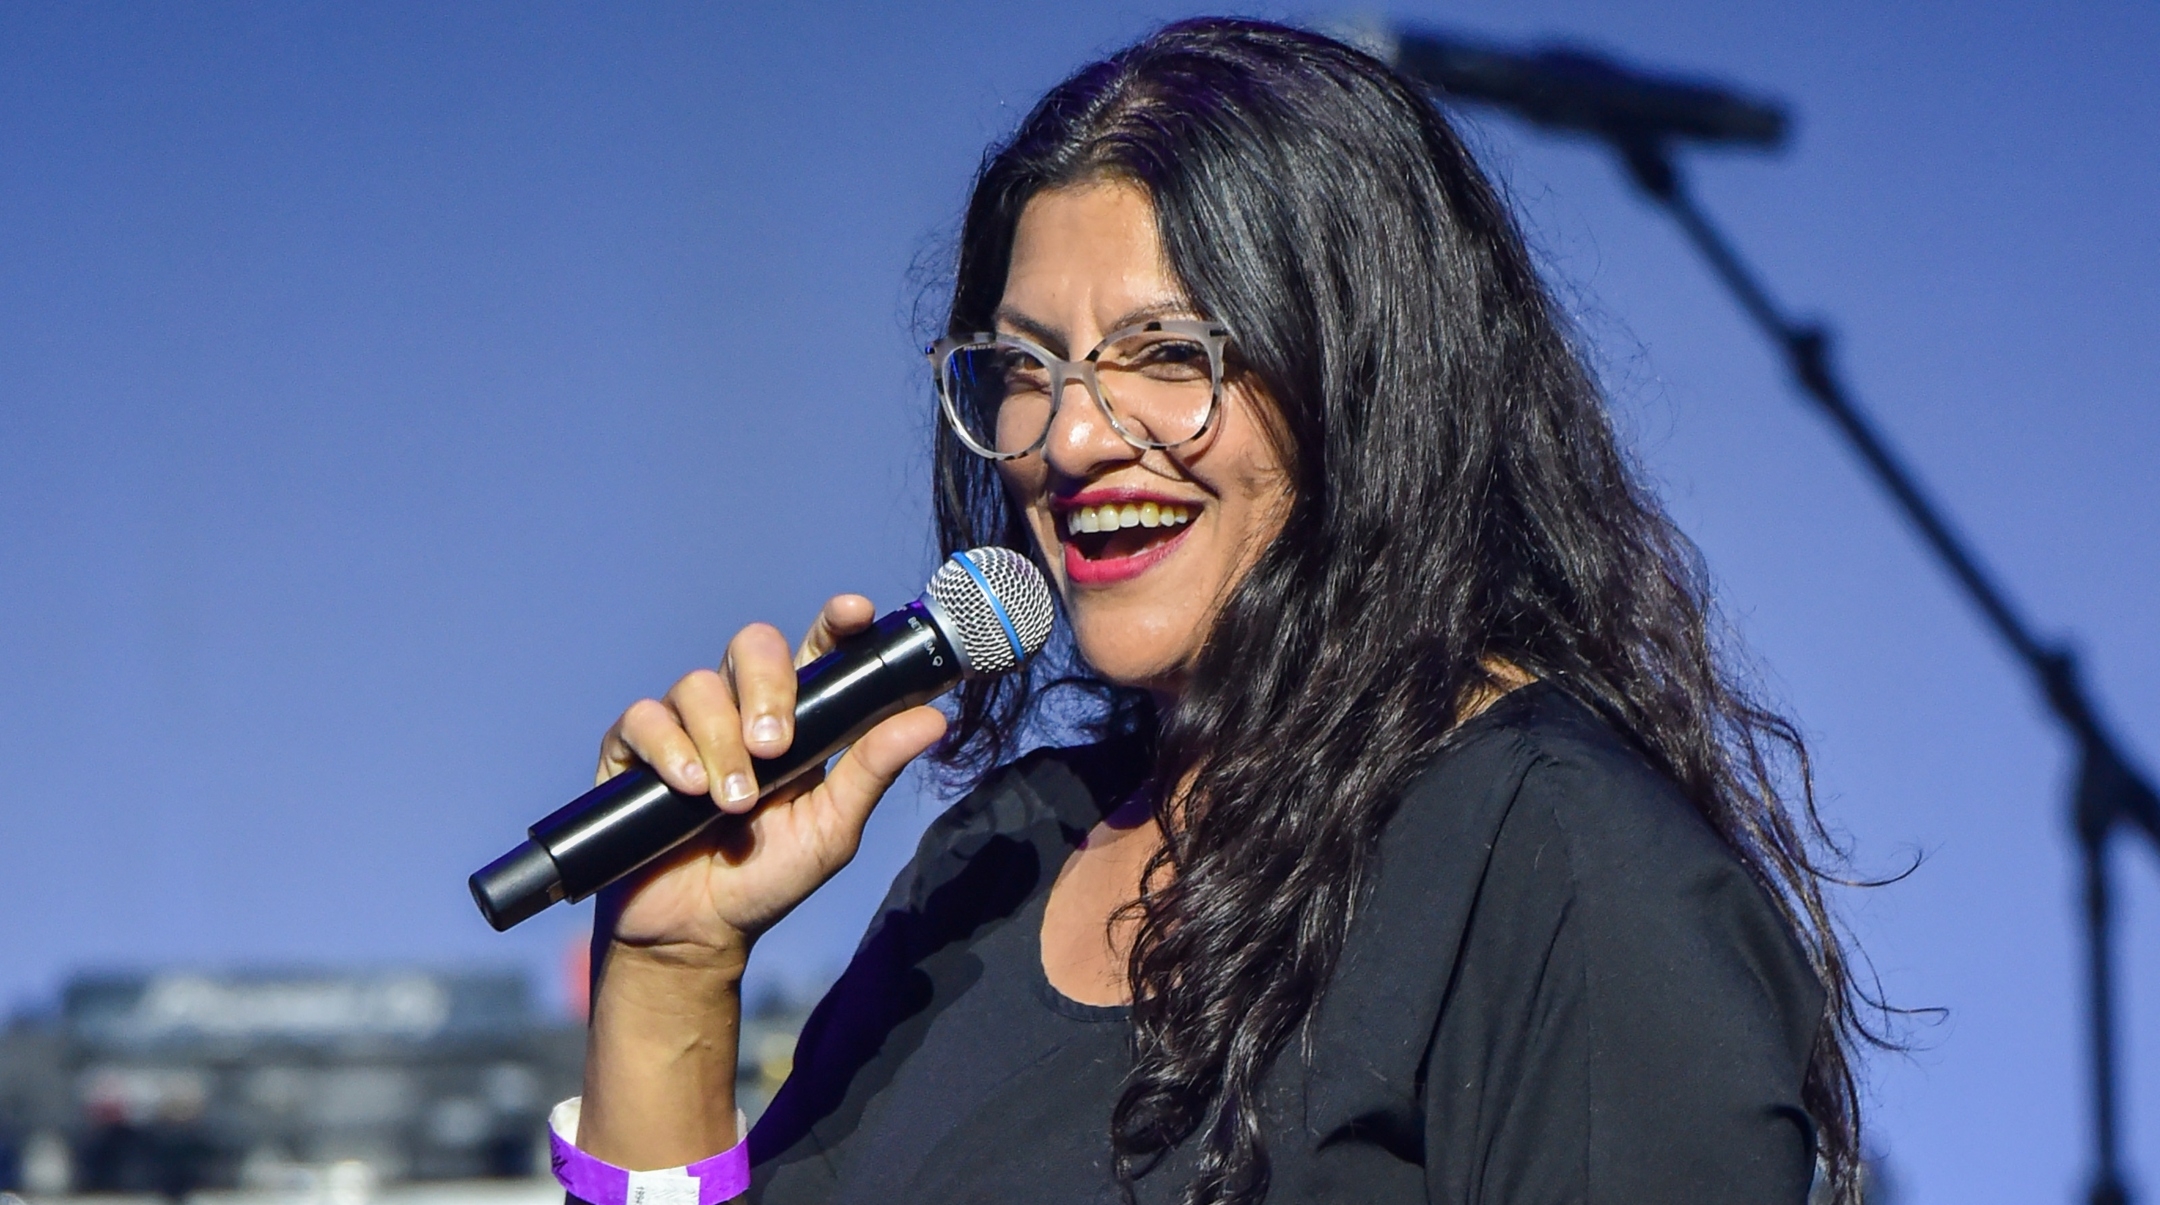 Michigan House Rep. Rashida Tlaib speaks on stage at a concert in Detroit, July 16, 2022. (Aaron J. Thornton/Getty Images)